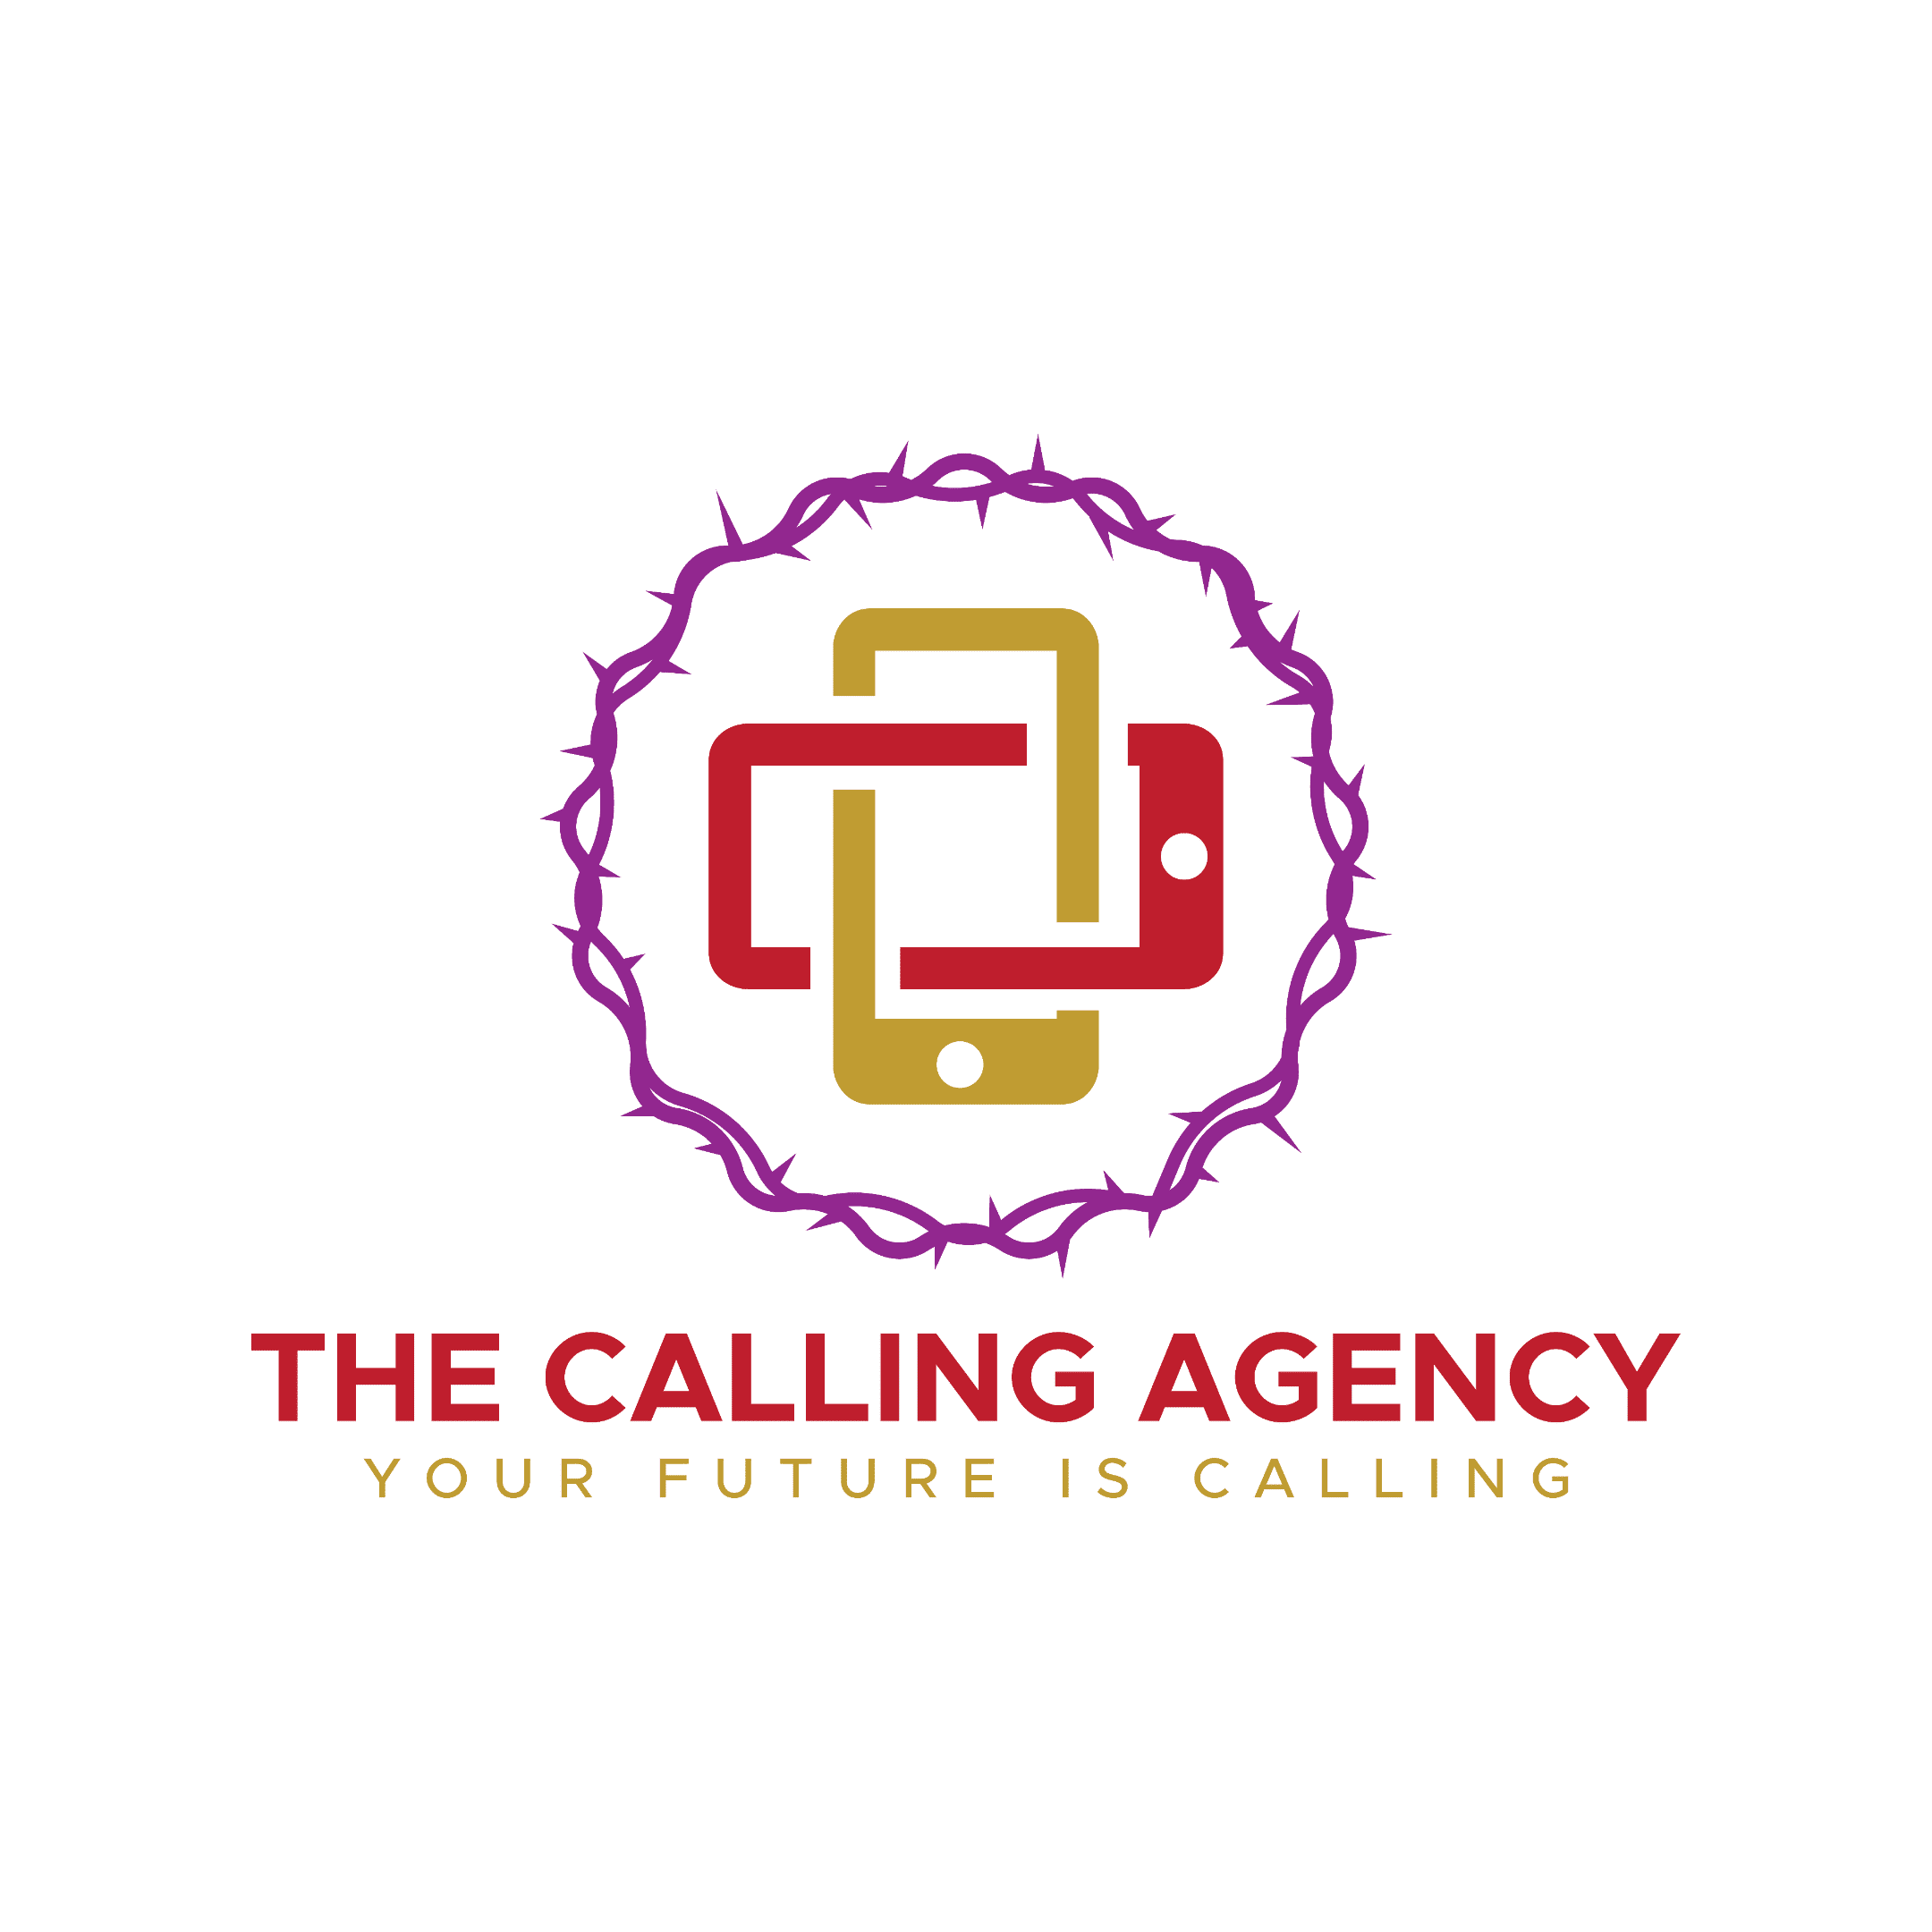 The Calling Agency